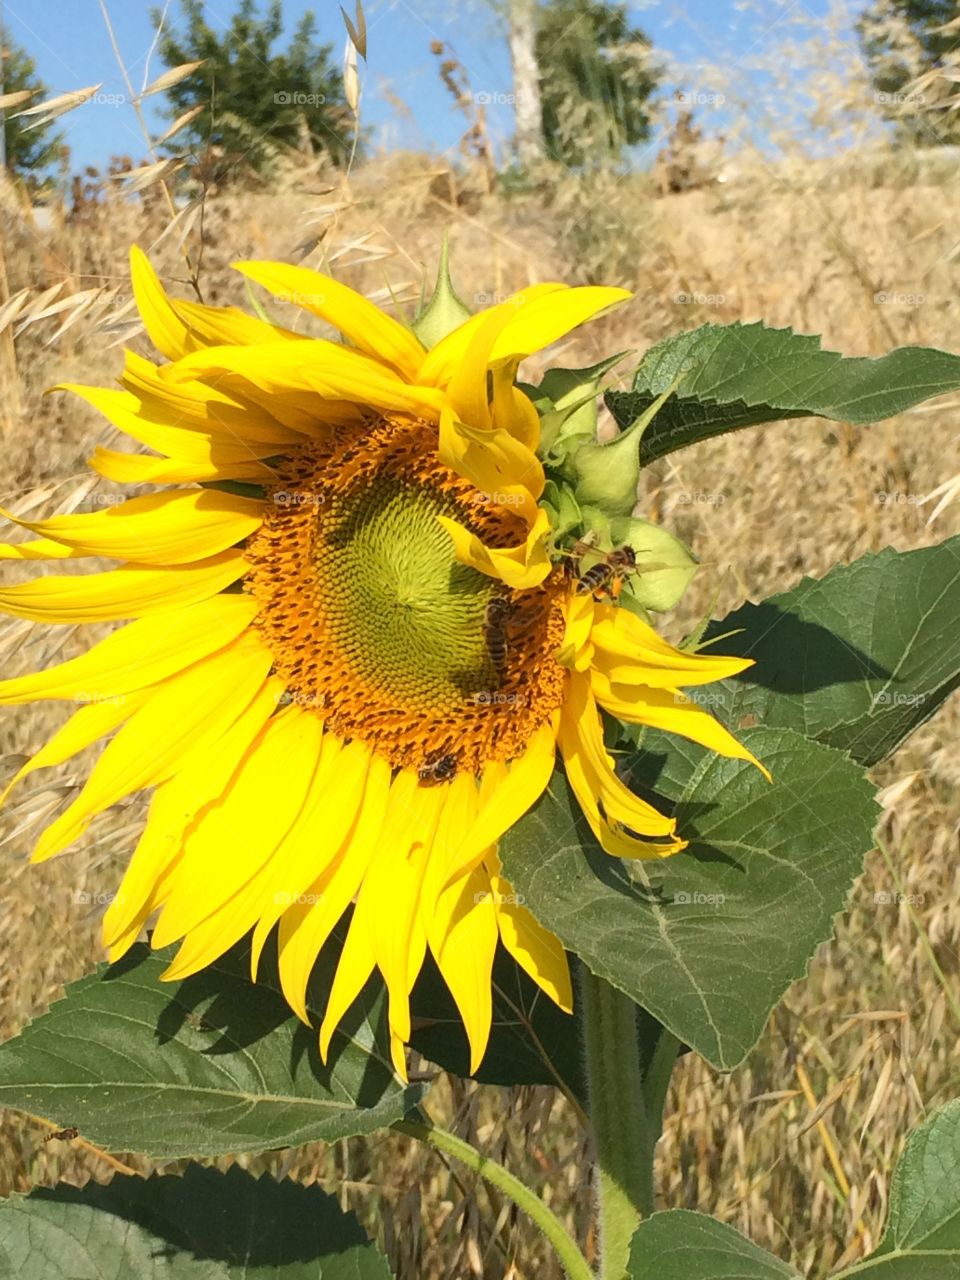 Sunflower . This sunflower grow in a land of grain, alone. 